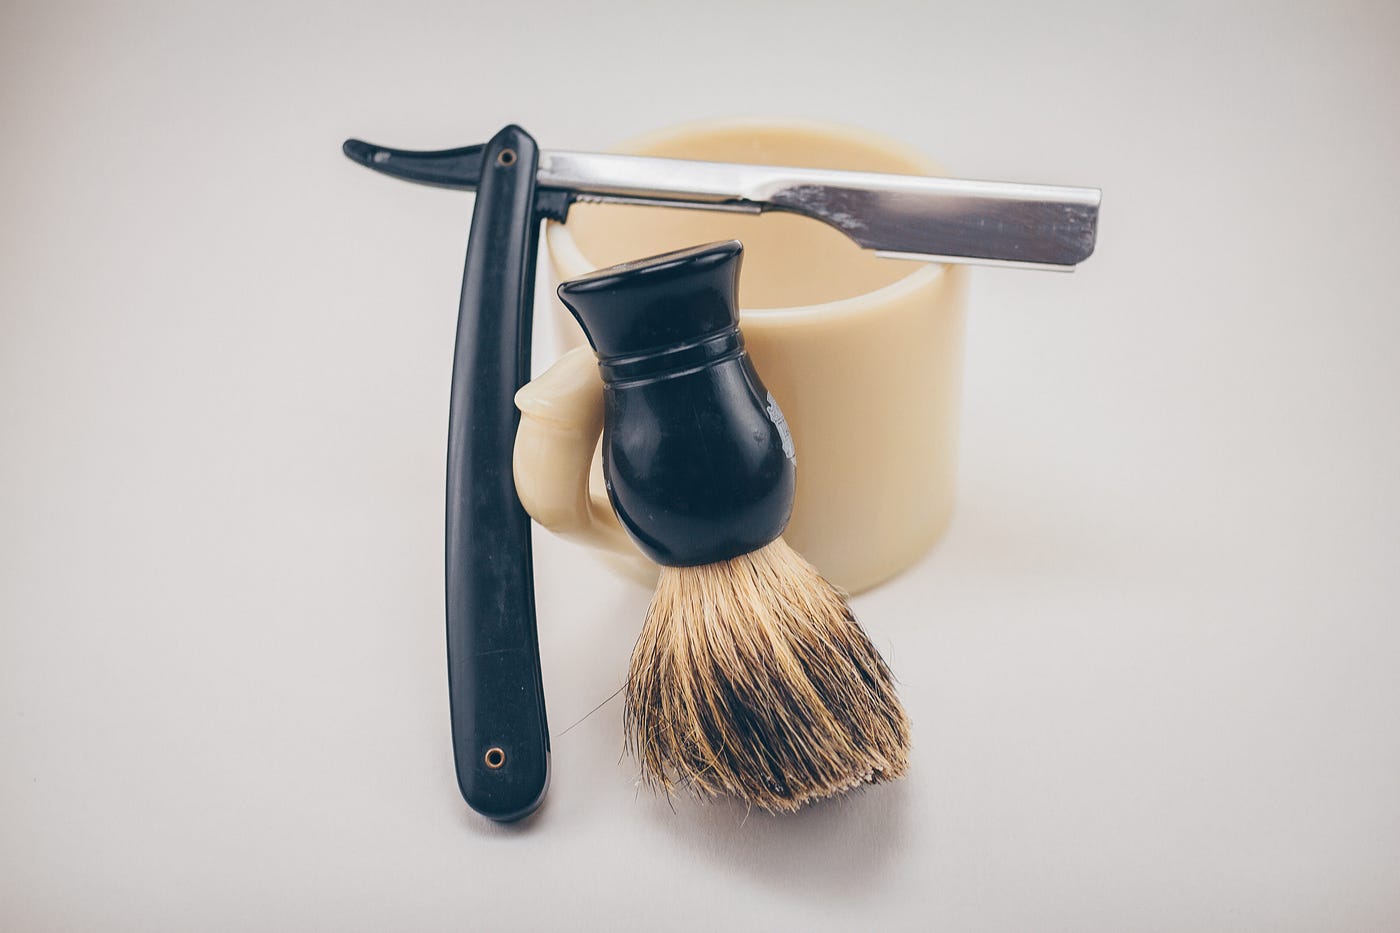 An image of a shaving brush and a shaving knife, barber style.